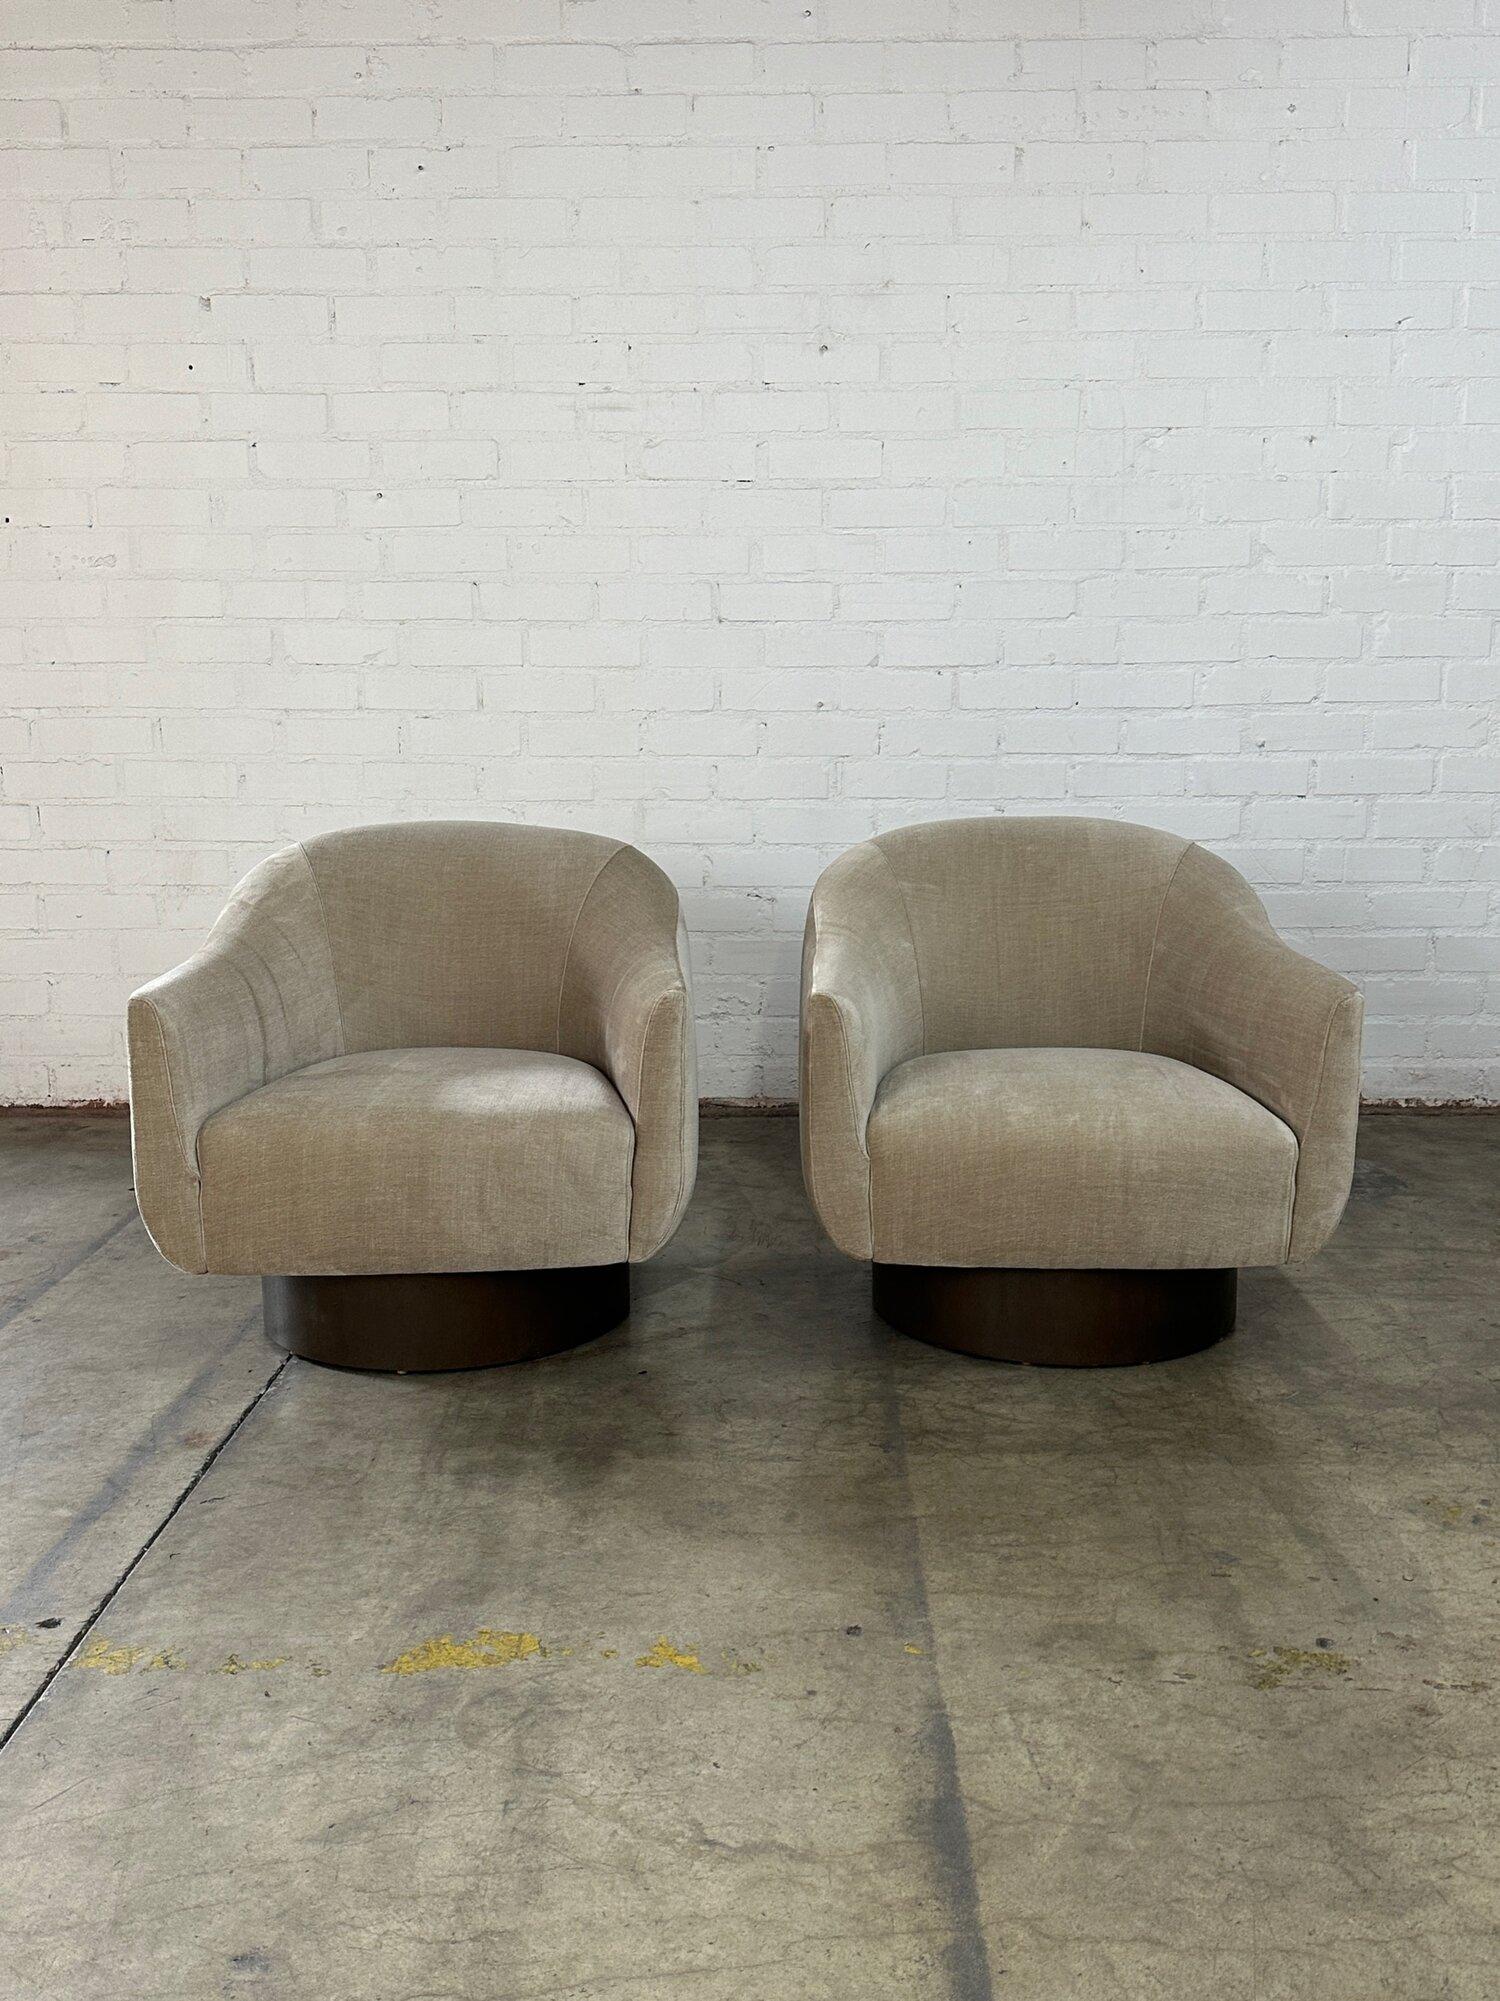 Plinth Base Barrel Lounge Chair In Good Condition For Sale In Los Angeles, CA